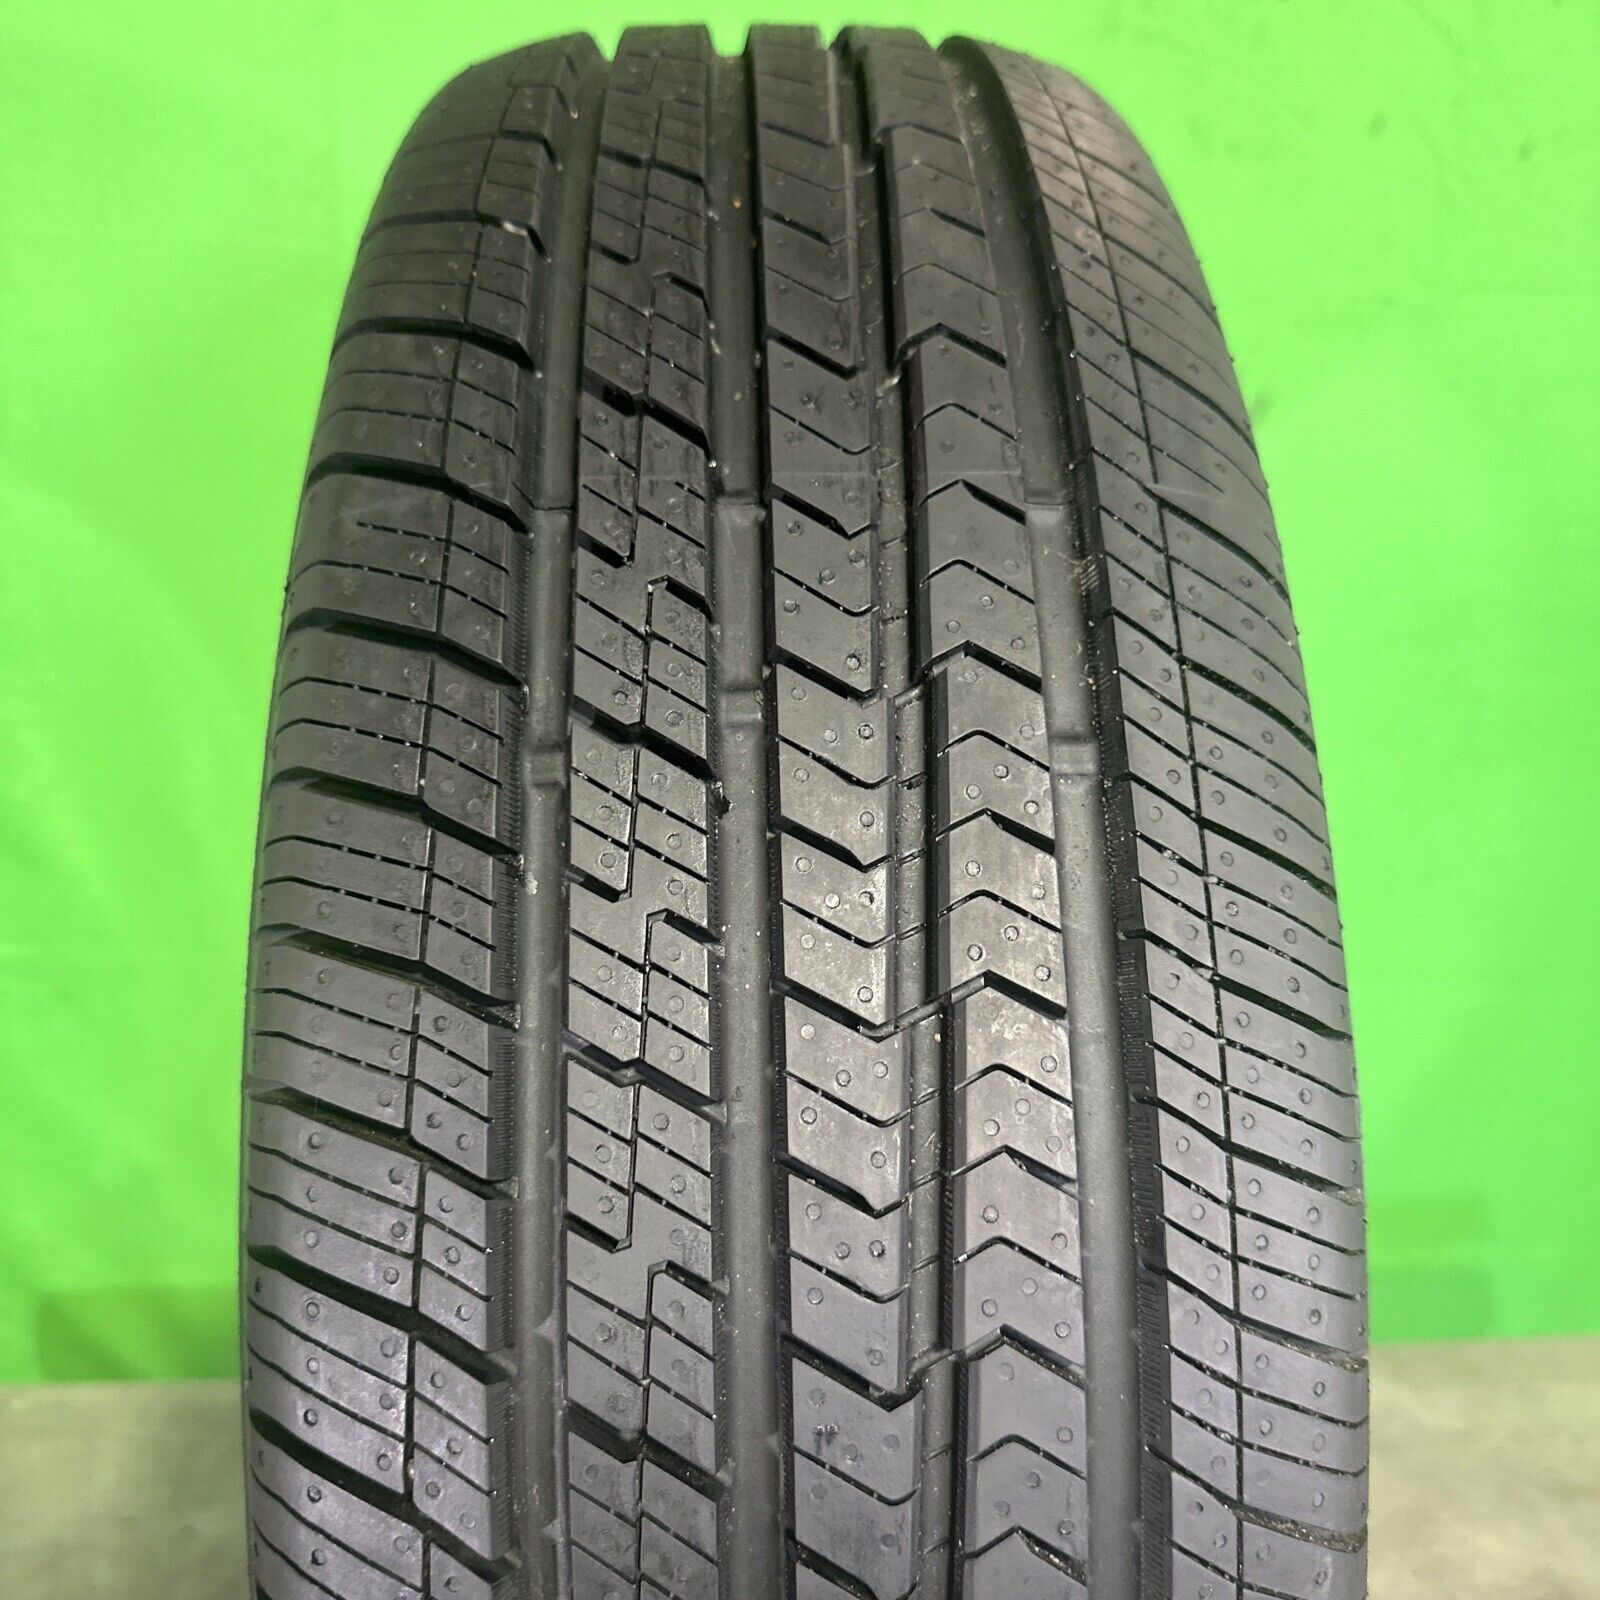 Single,New-215/70R16 Toyo Open country Q/T 100H DOT 2219